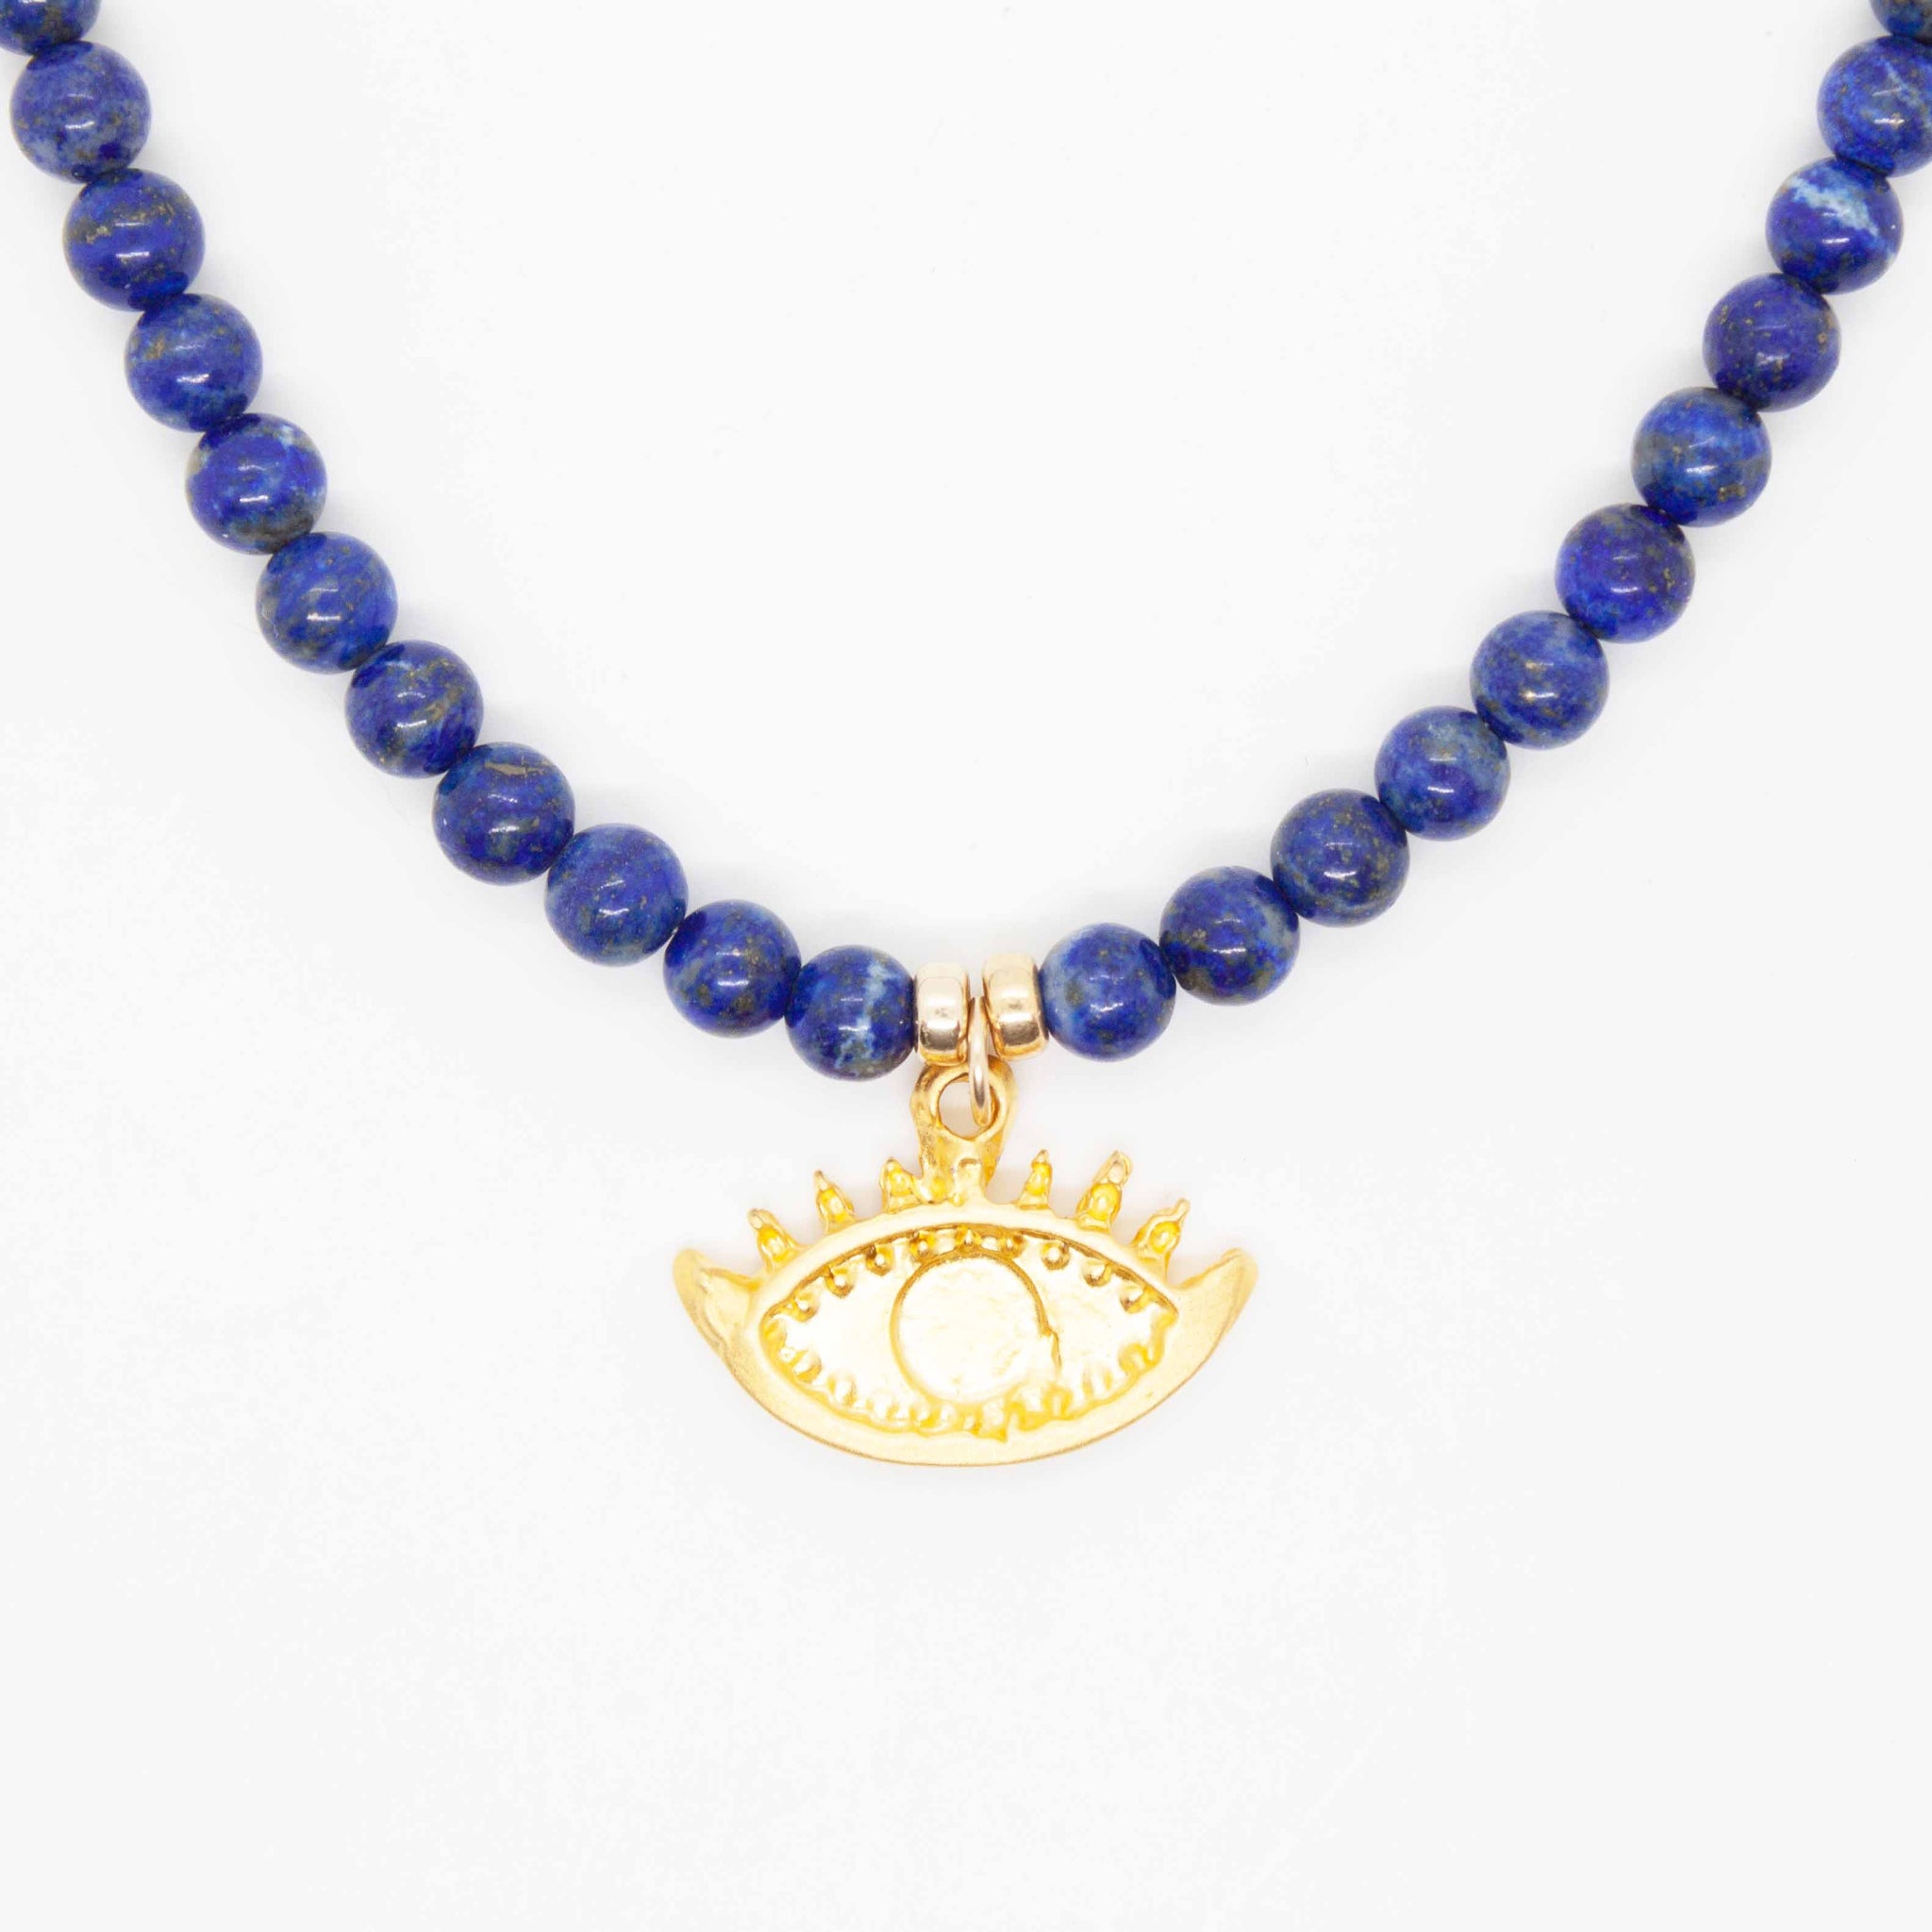 A universal symbol of protection, the evil eye talisman dates back to ancient Greece. This charm is paired with lapis lazuli, which is also believed to provide protection and shield the wearer from negative influences. 16 inch beaded lapis necklace with evil eye charm and gold filled spring ring clasp. Handmade in Toronto by kp jewelry co.